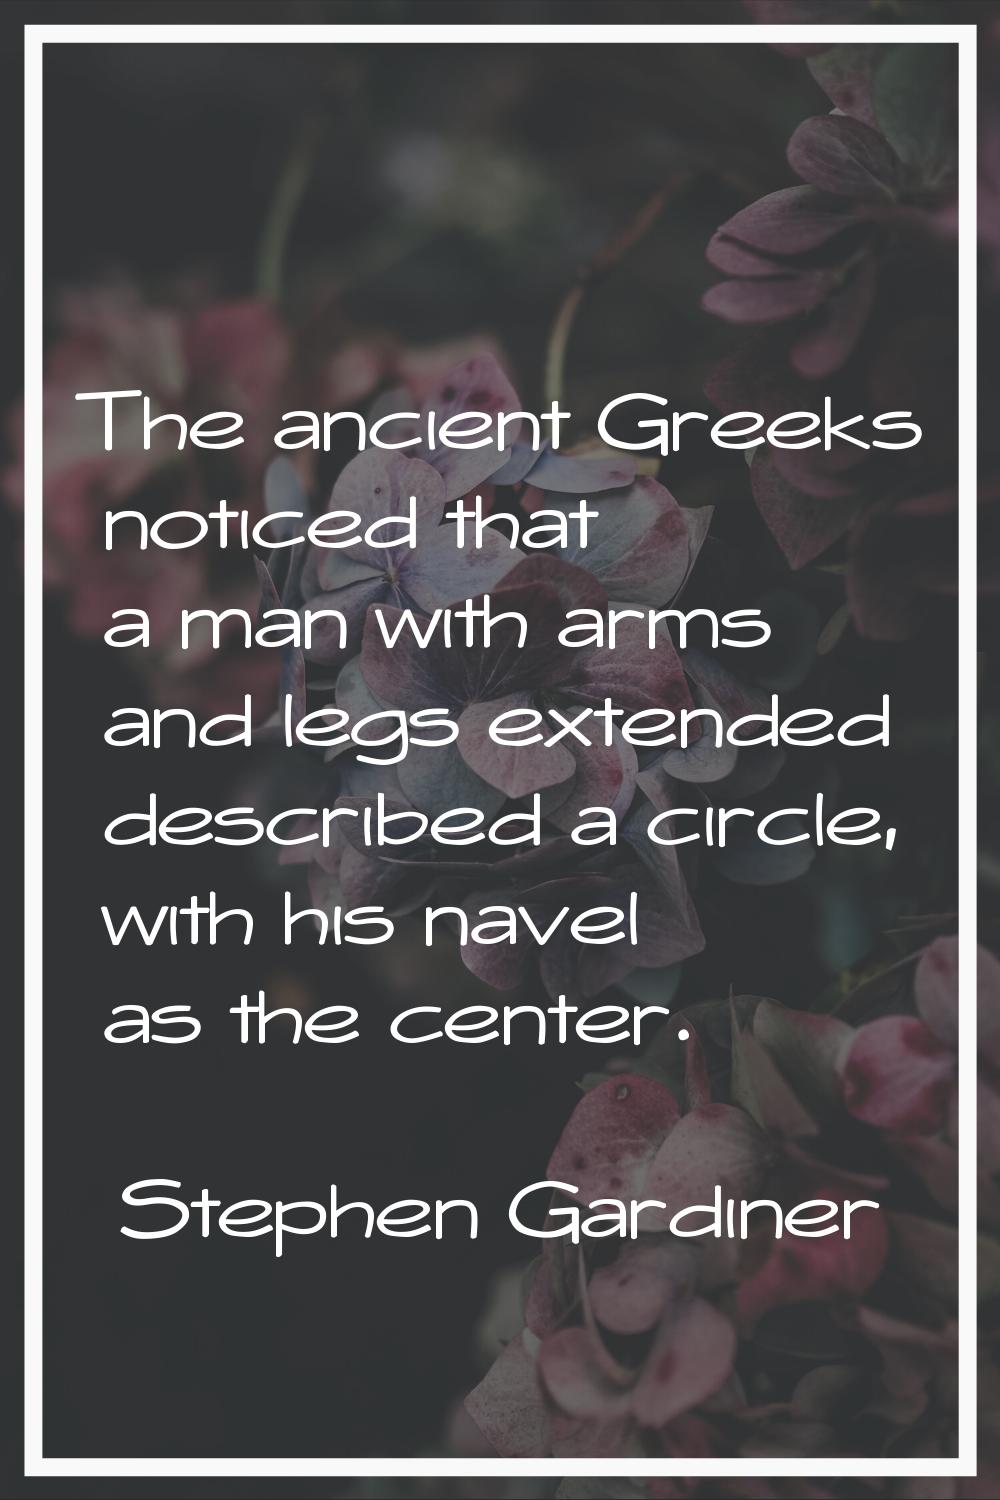 The ancient Greeks noticed that a man with arms and legs extended described a circle, with his nave